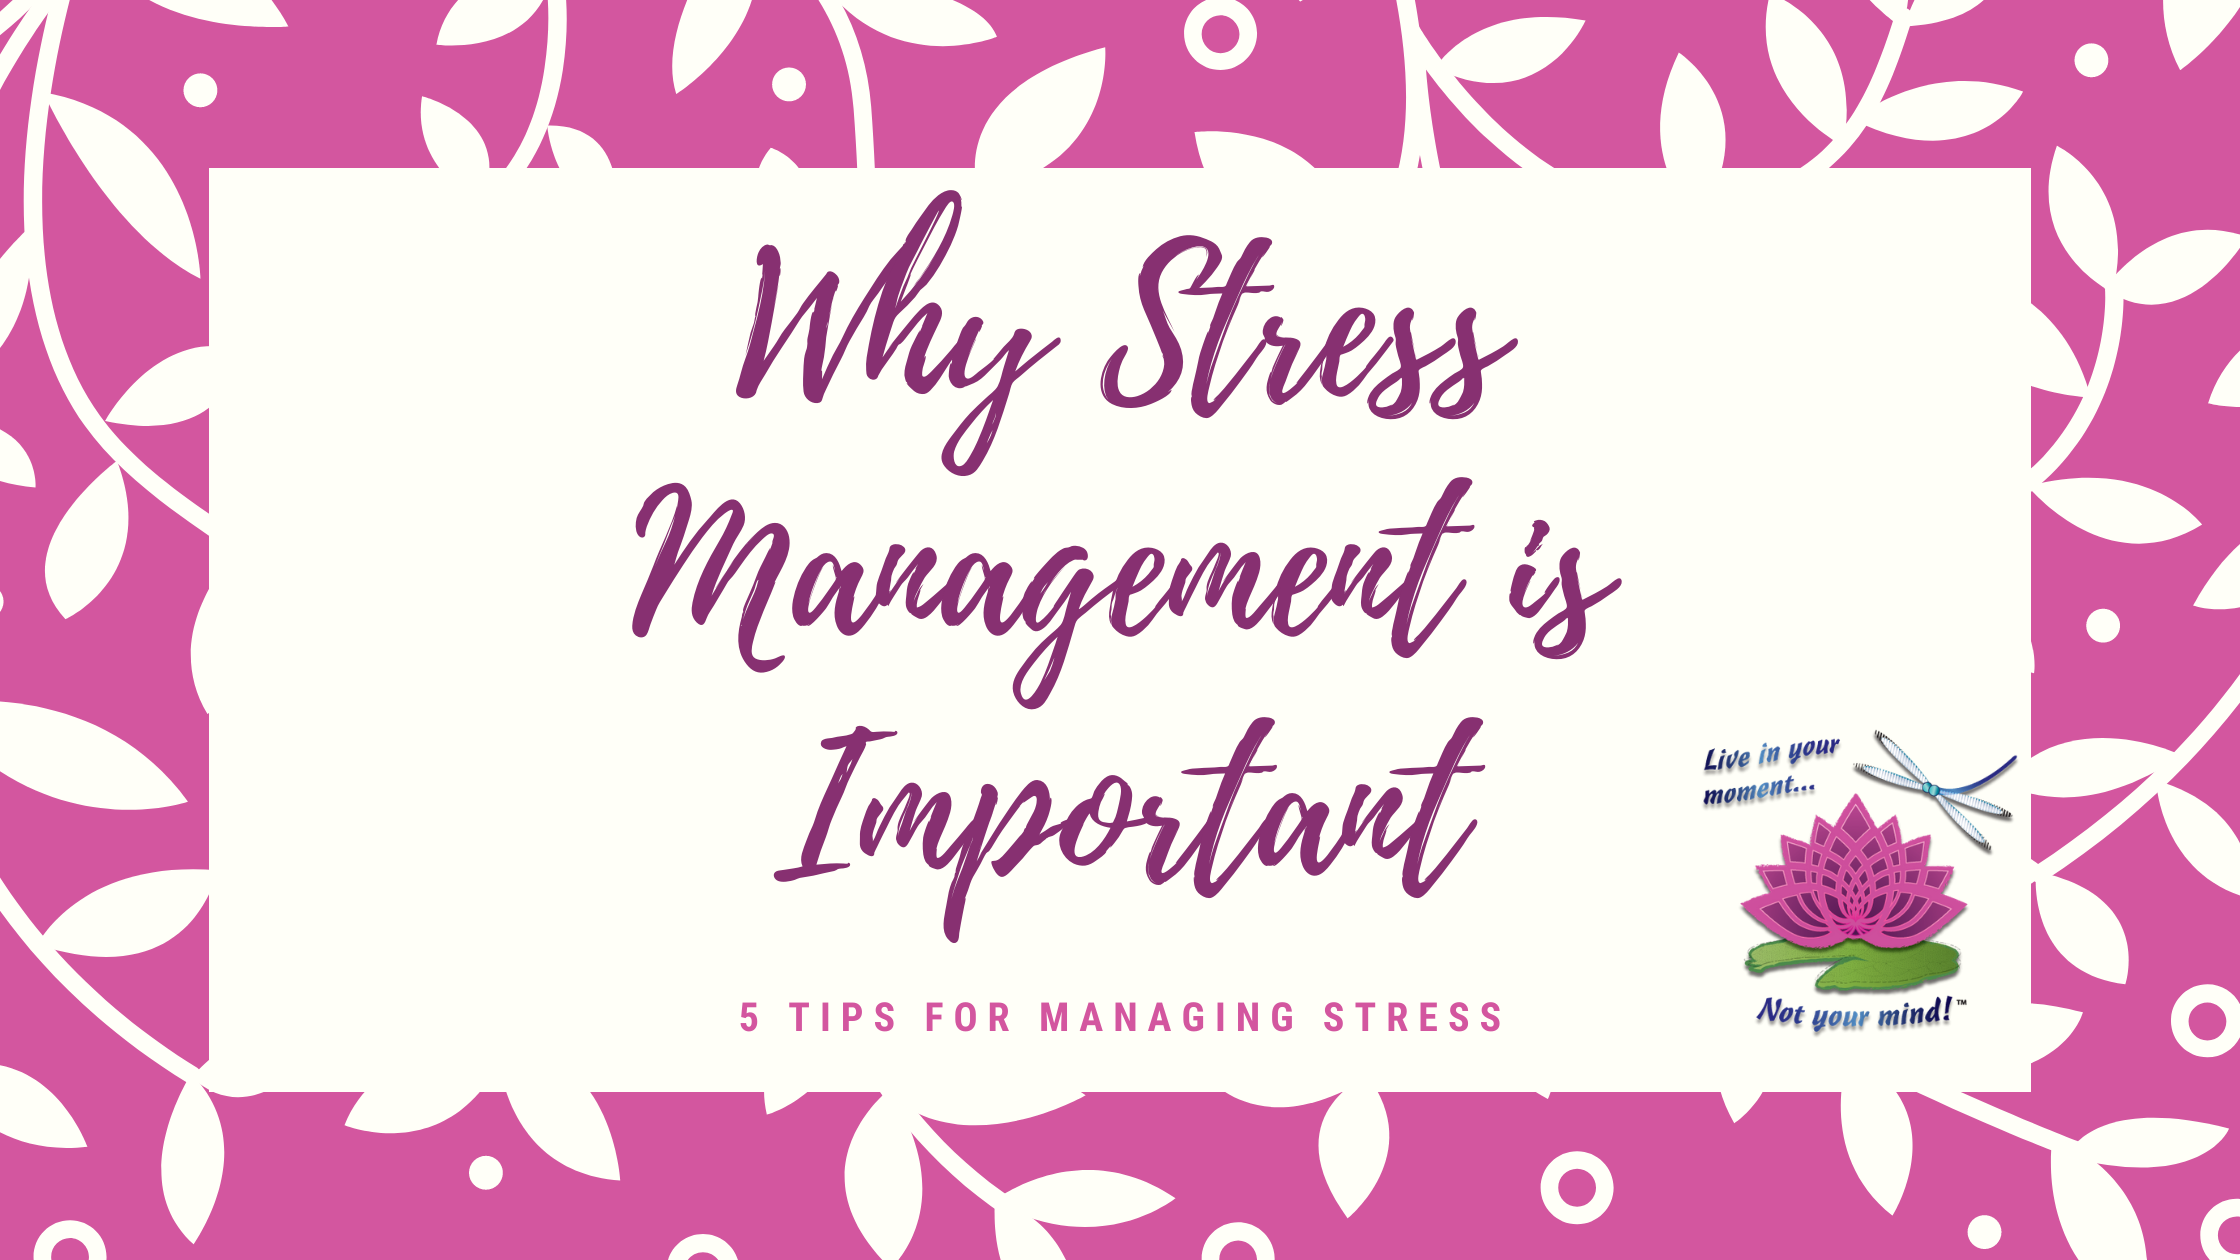 Stress contributes to physical and mental health problems. Explore details about why stress management is important and learn 5 tips for managing stress.